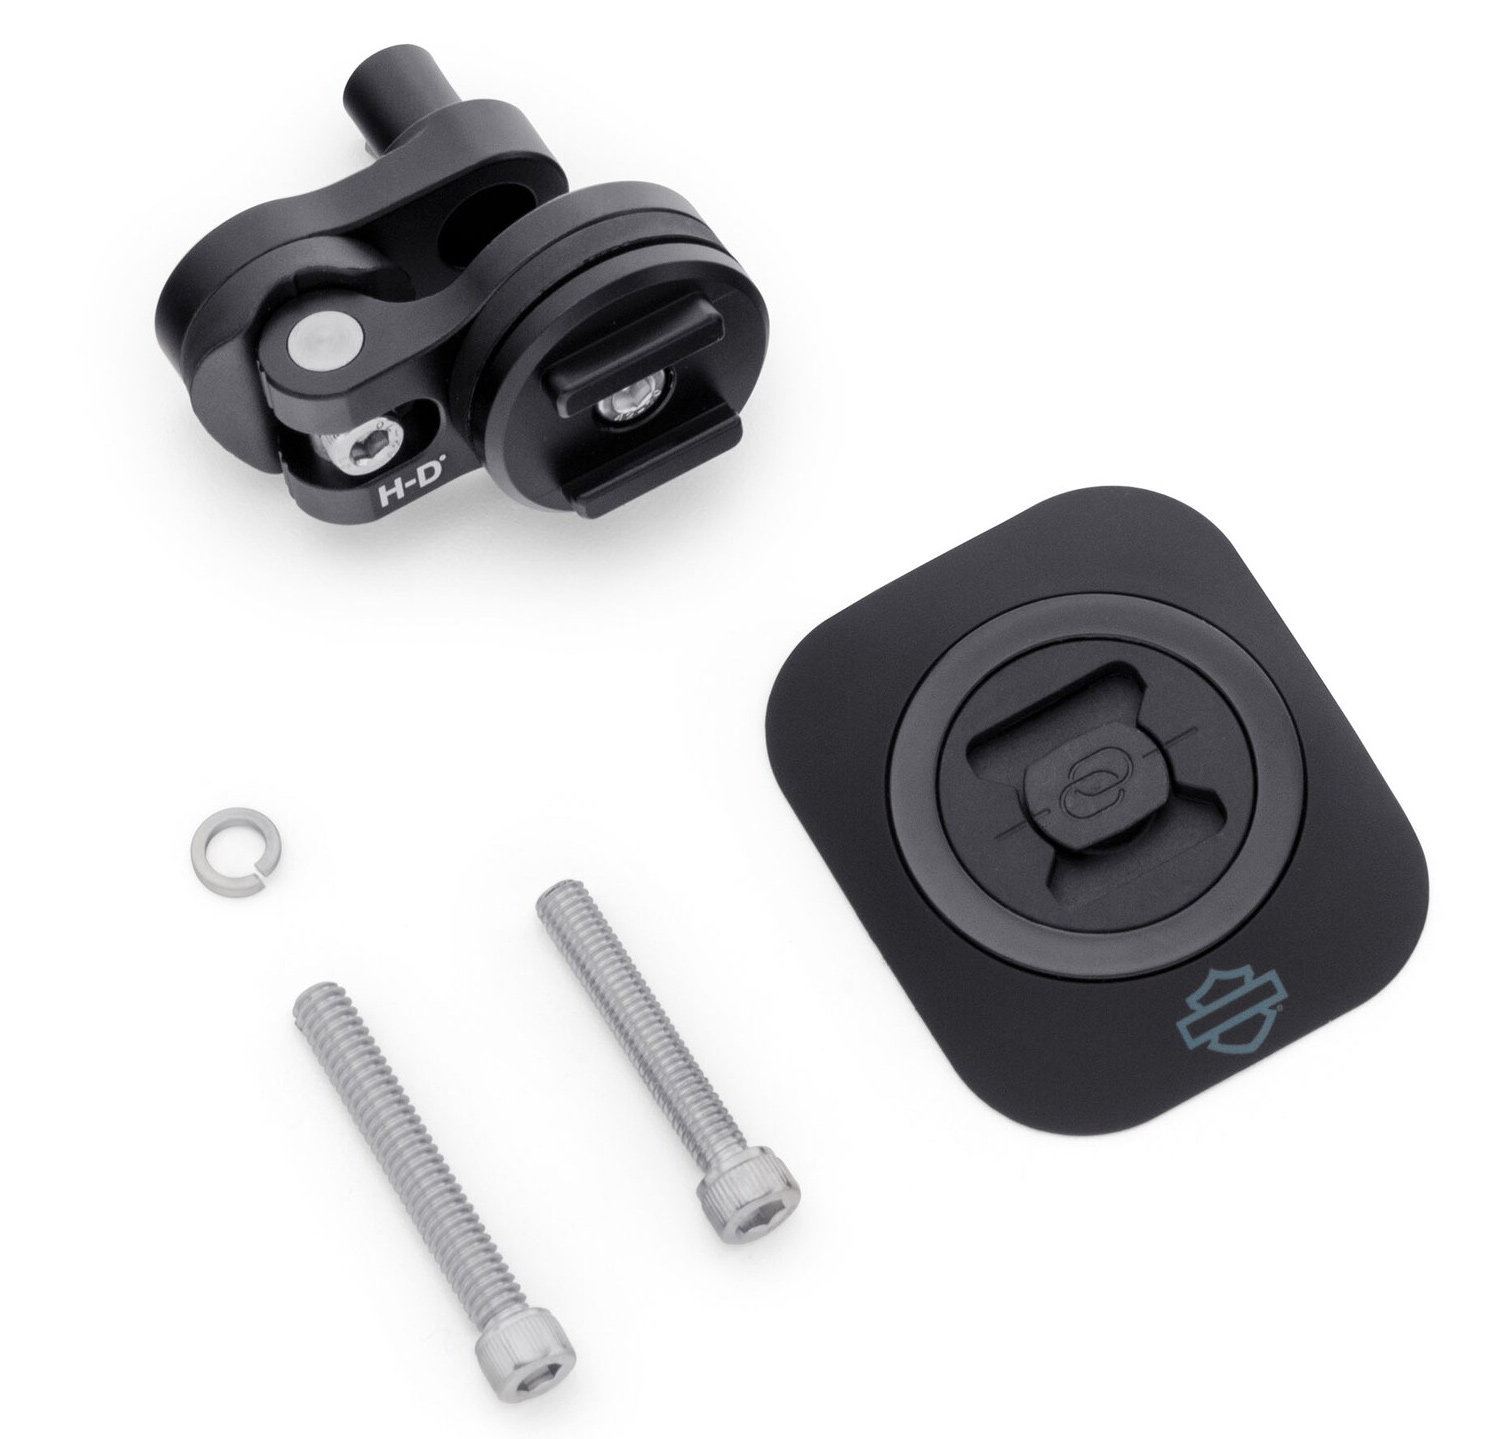 76001071 Harley Davidson Universal Phone Carrier And Clutch Mount At Thunderbike Shop